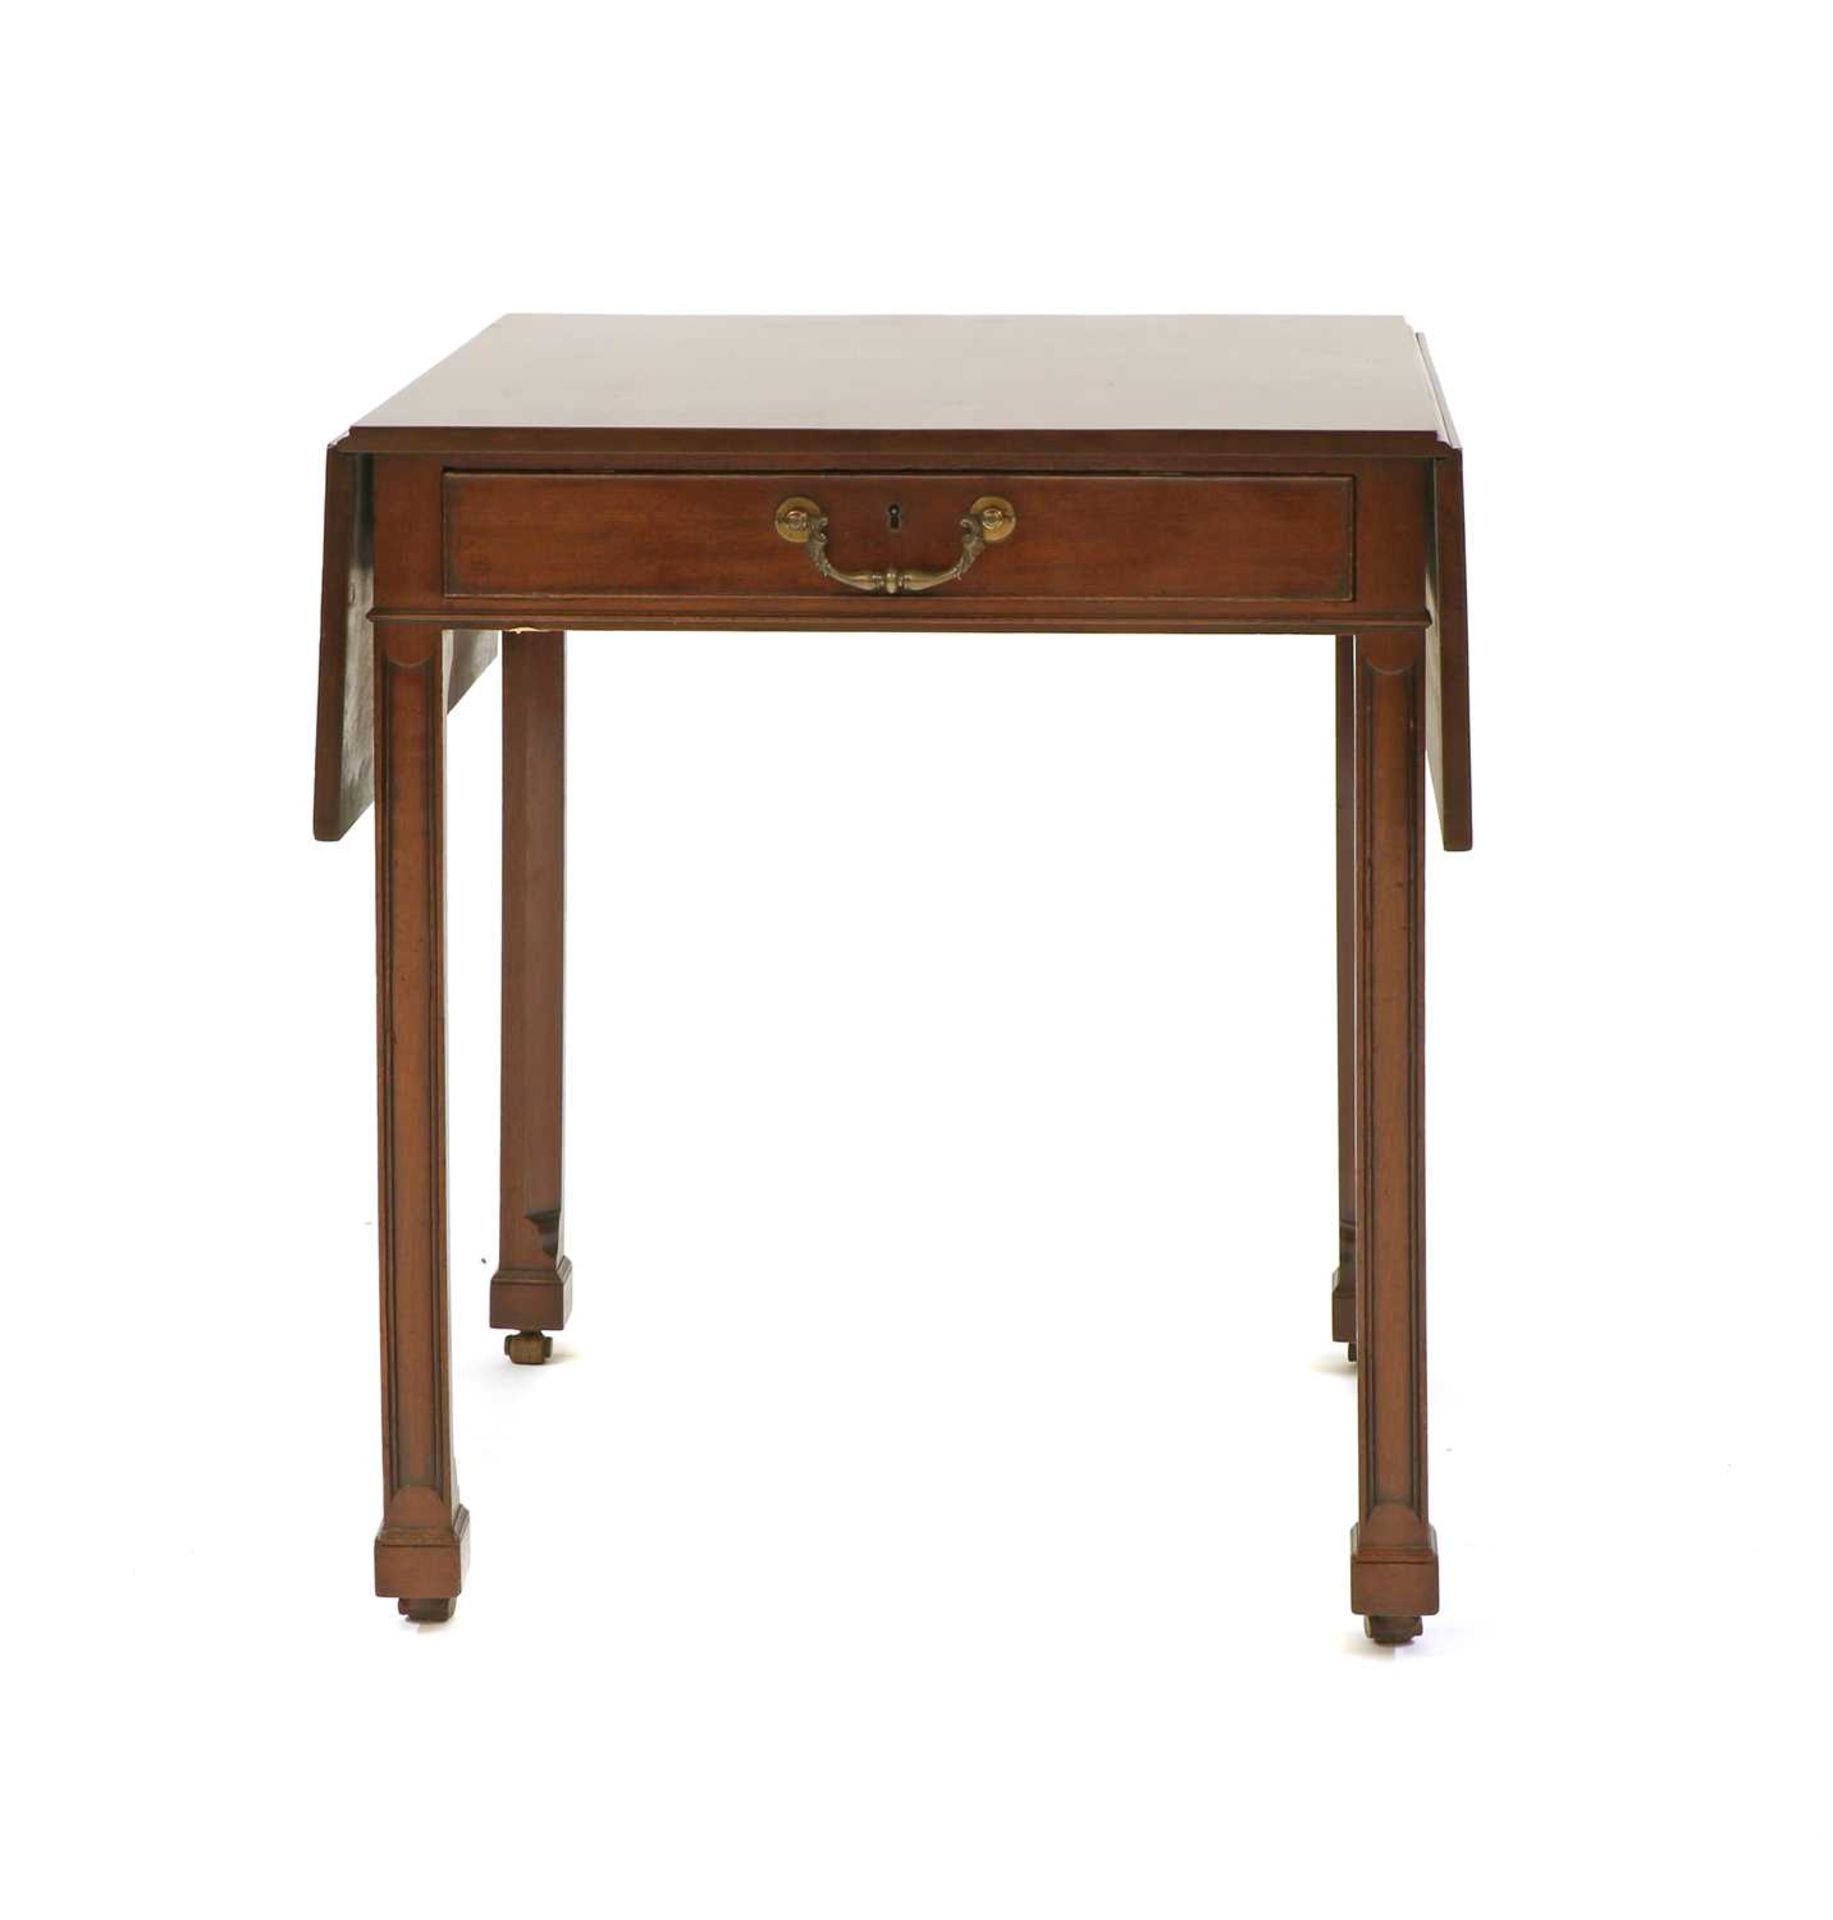 A George III Chippendale period mahogany Pembroke games table